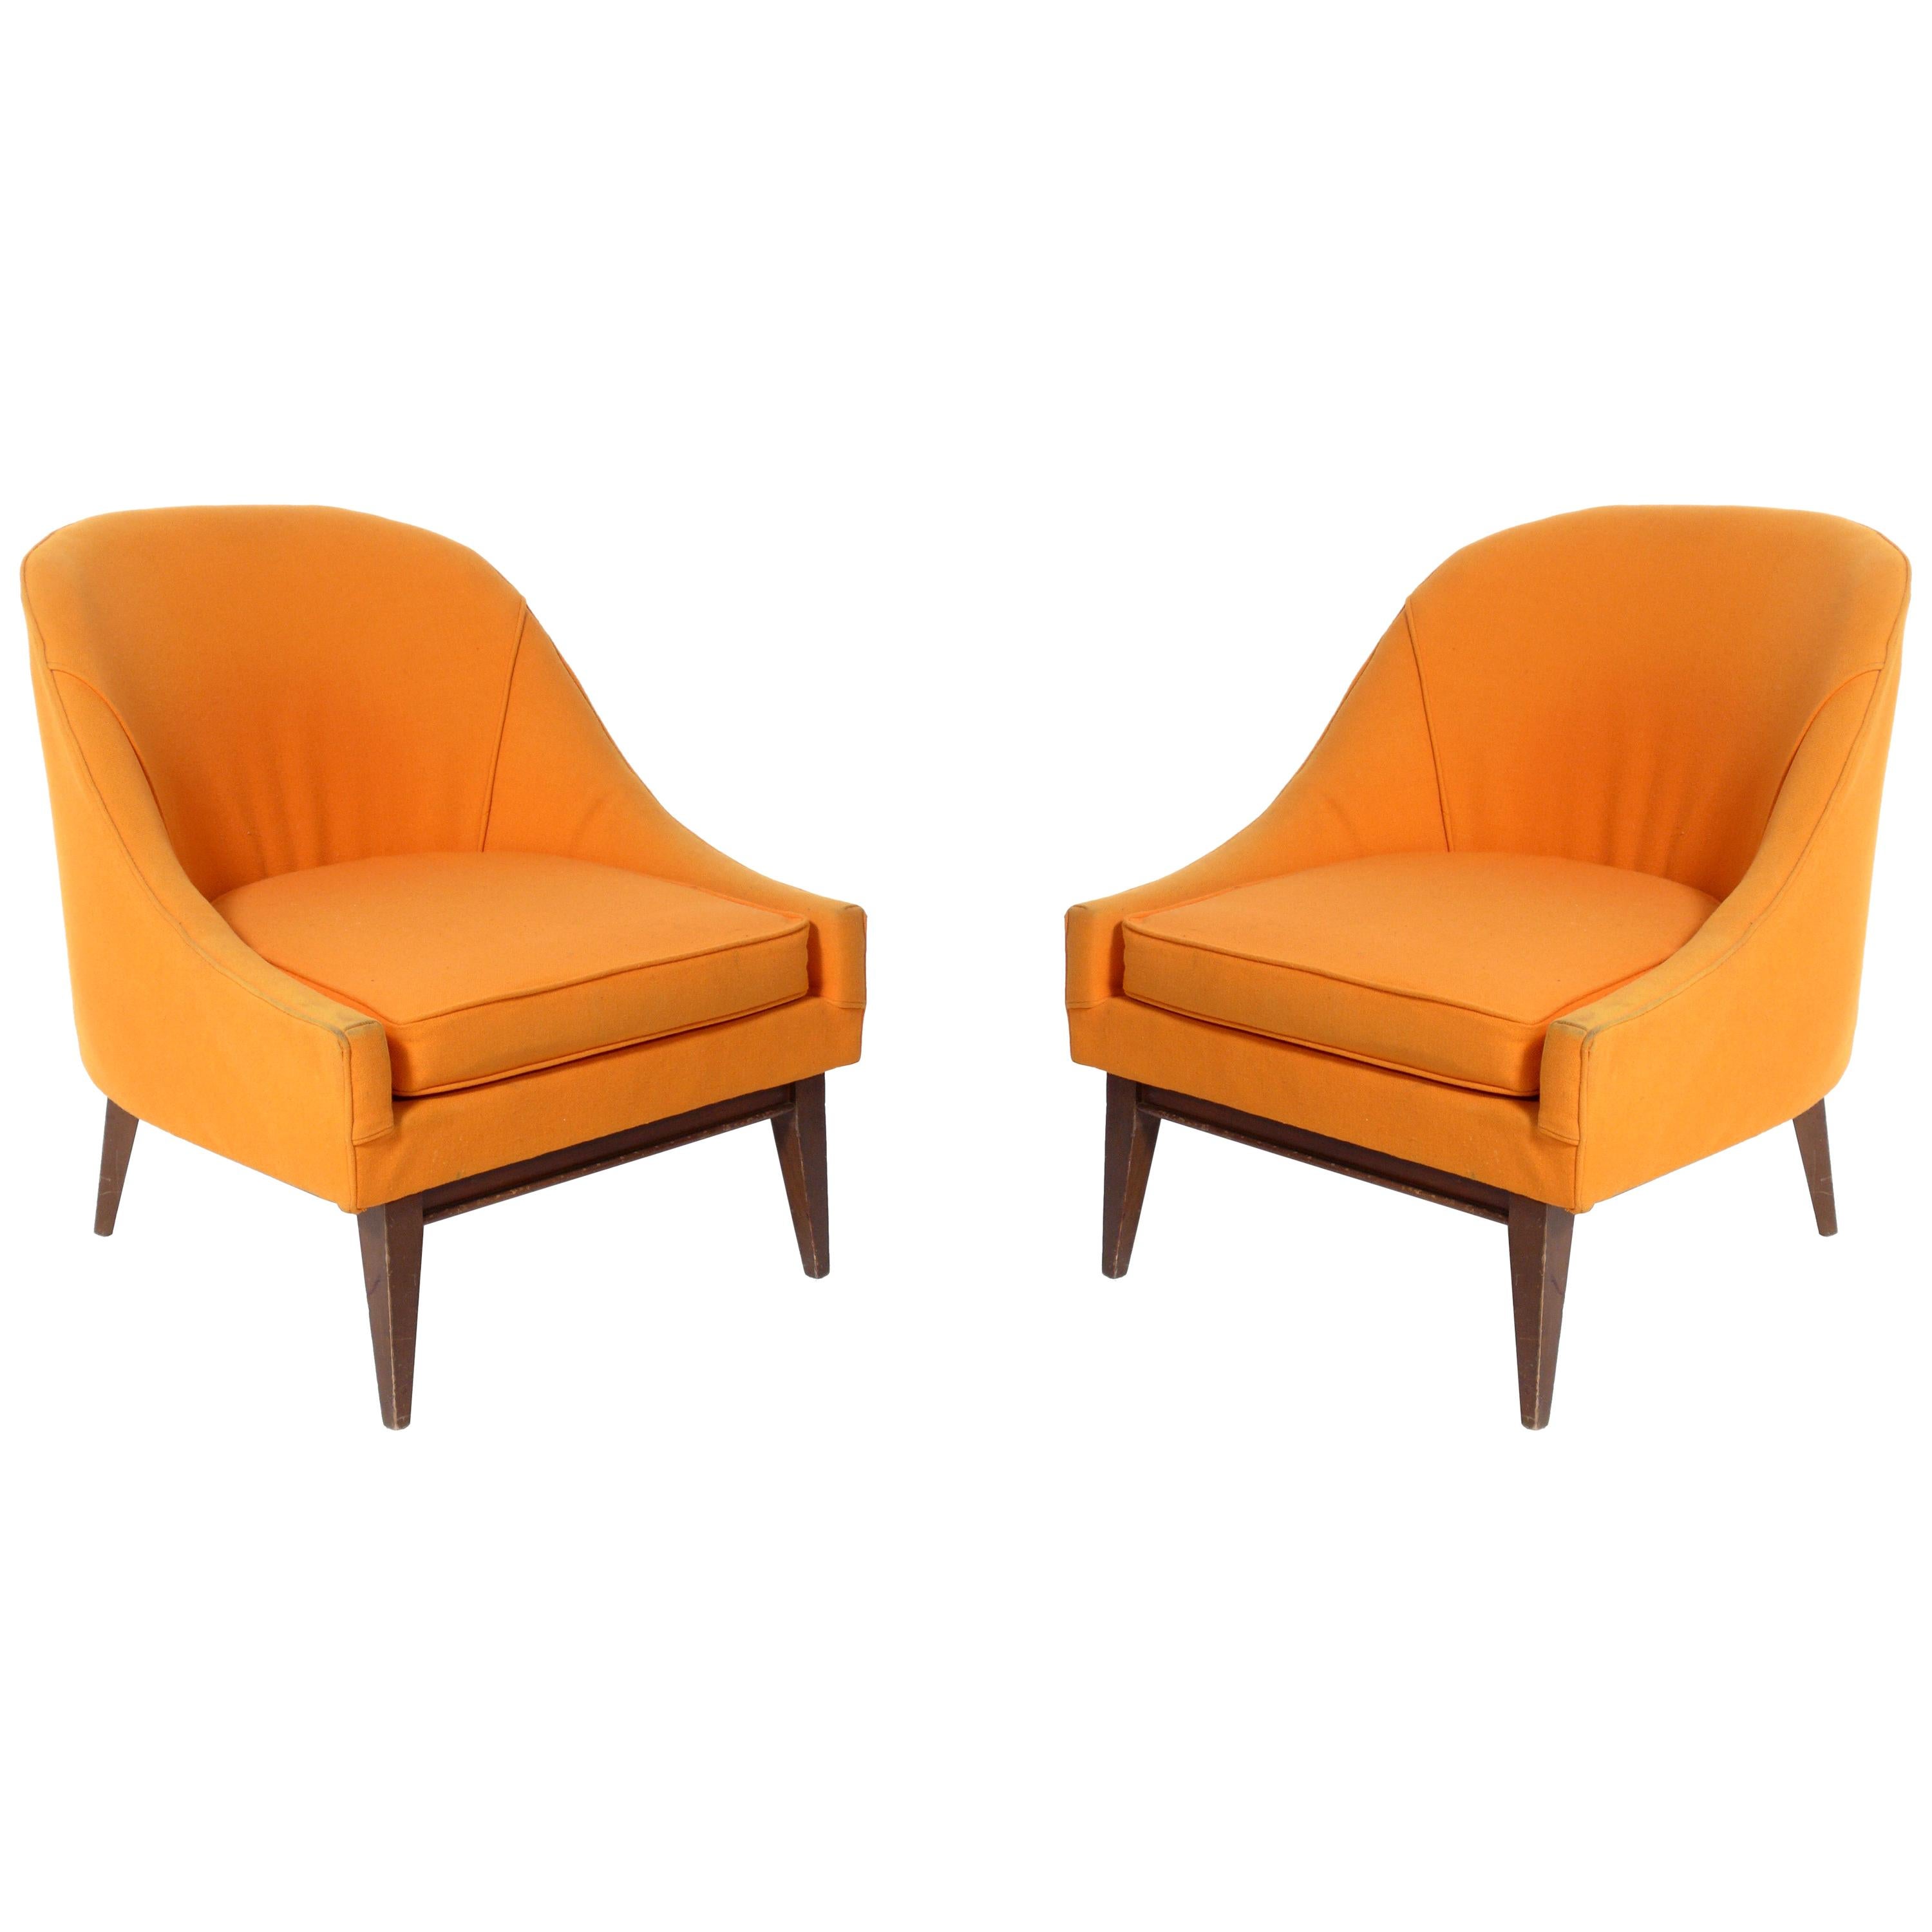 Pair of Curvaceous Midcentury Lounge Chairs